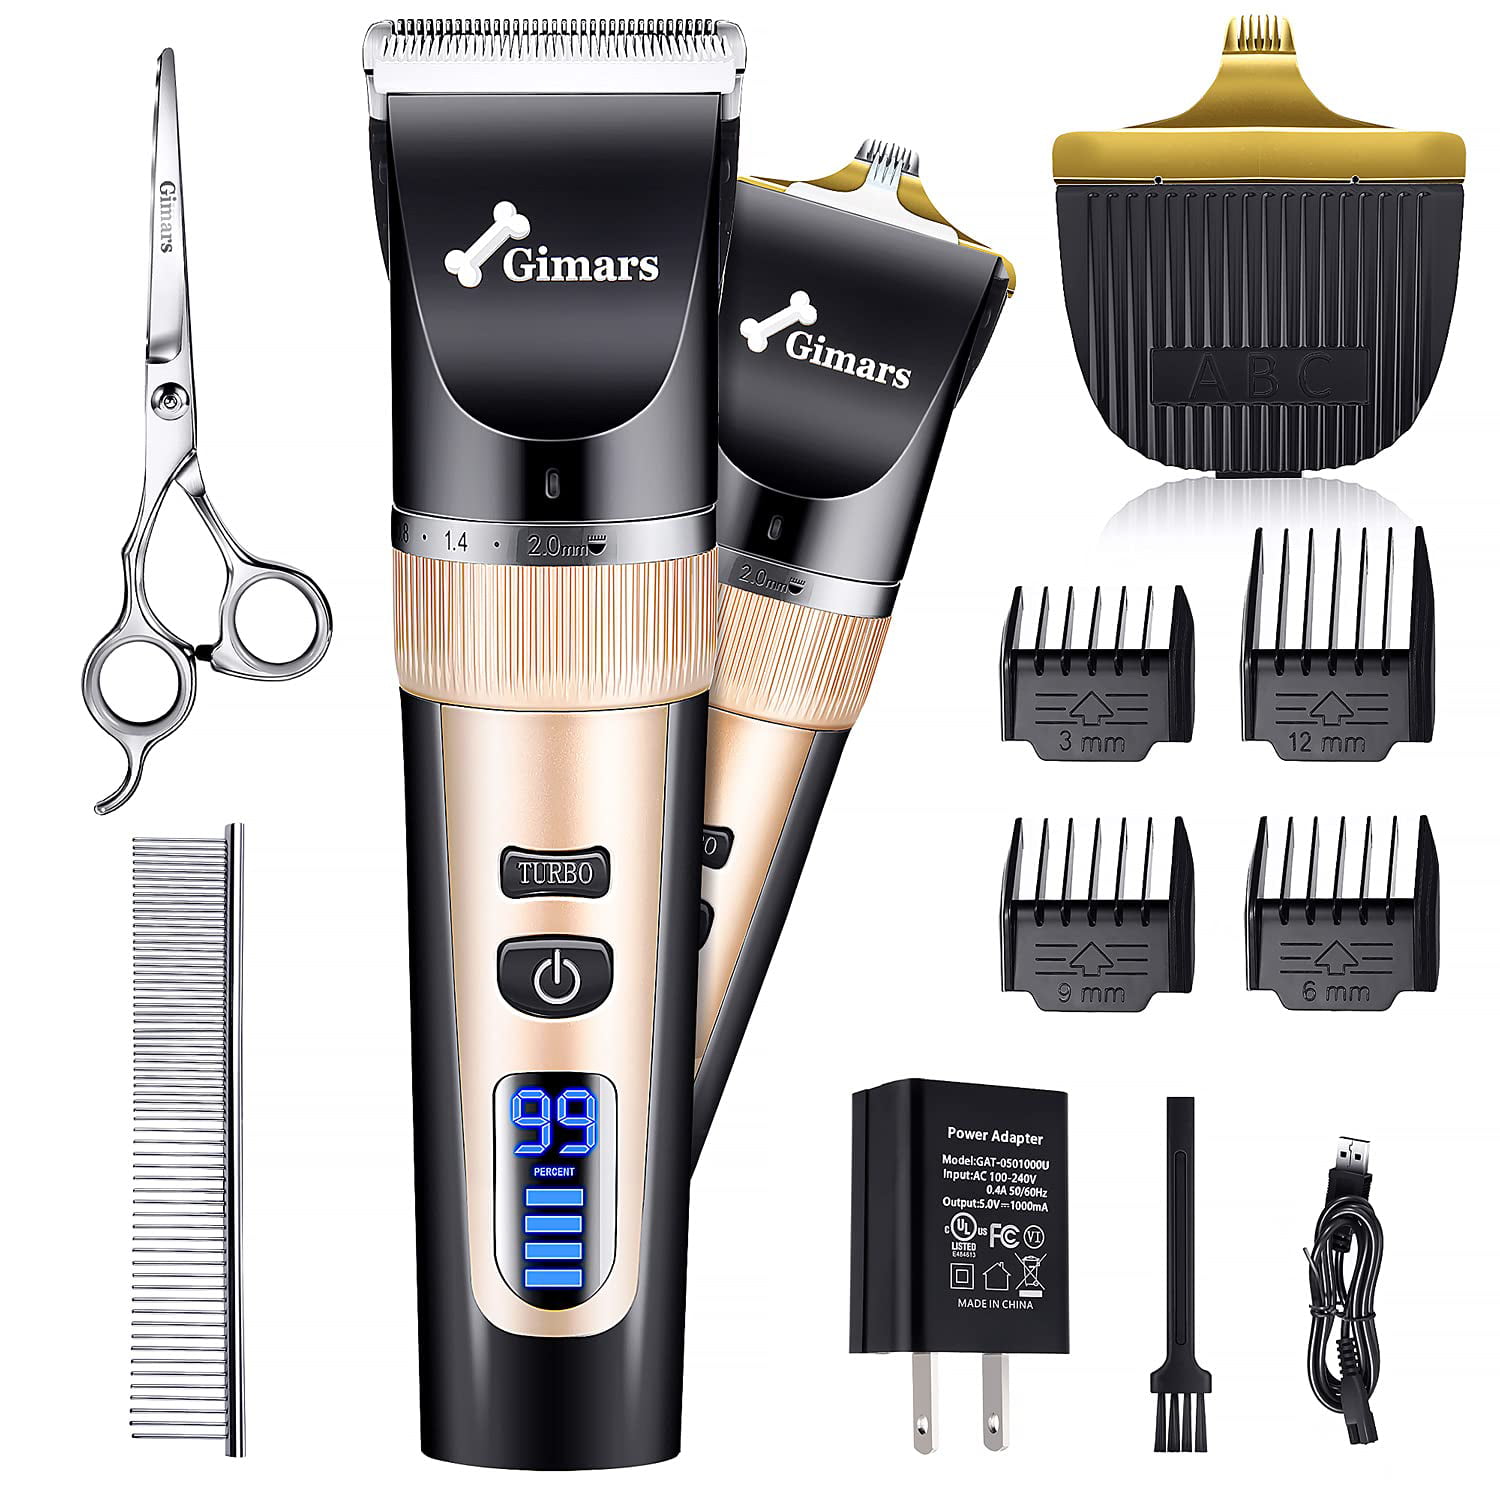 Cats and Horse Rechargeable High-performance Battery Ceramic Blade OMORC Cordless Dog Clippers Low Noise Design 8 Limited Combs for Dogs Professional Dog Grooming Clippers with Large LCD Screen 